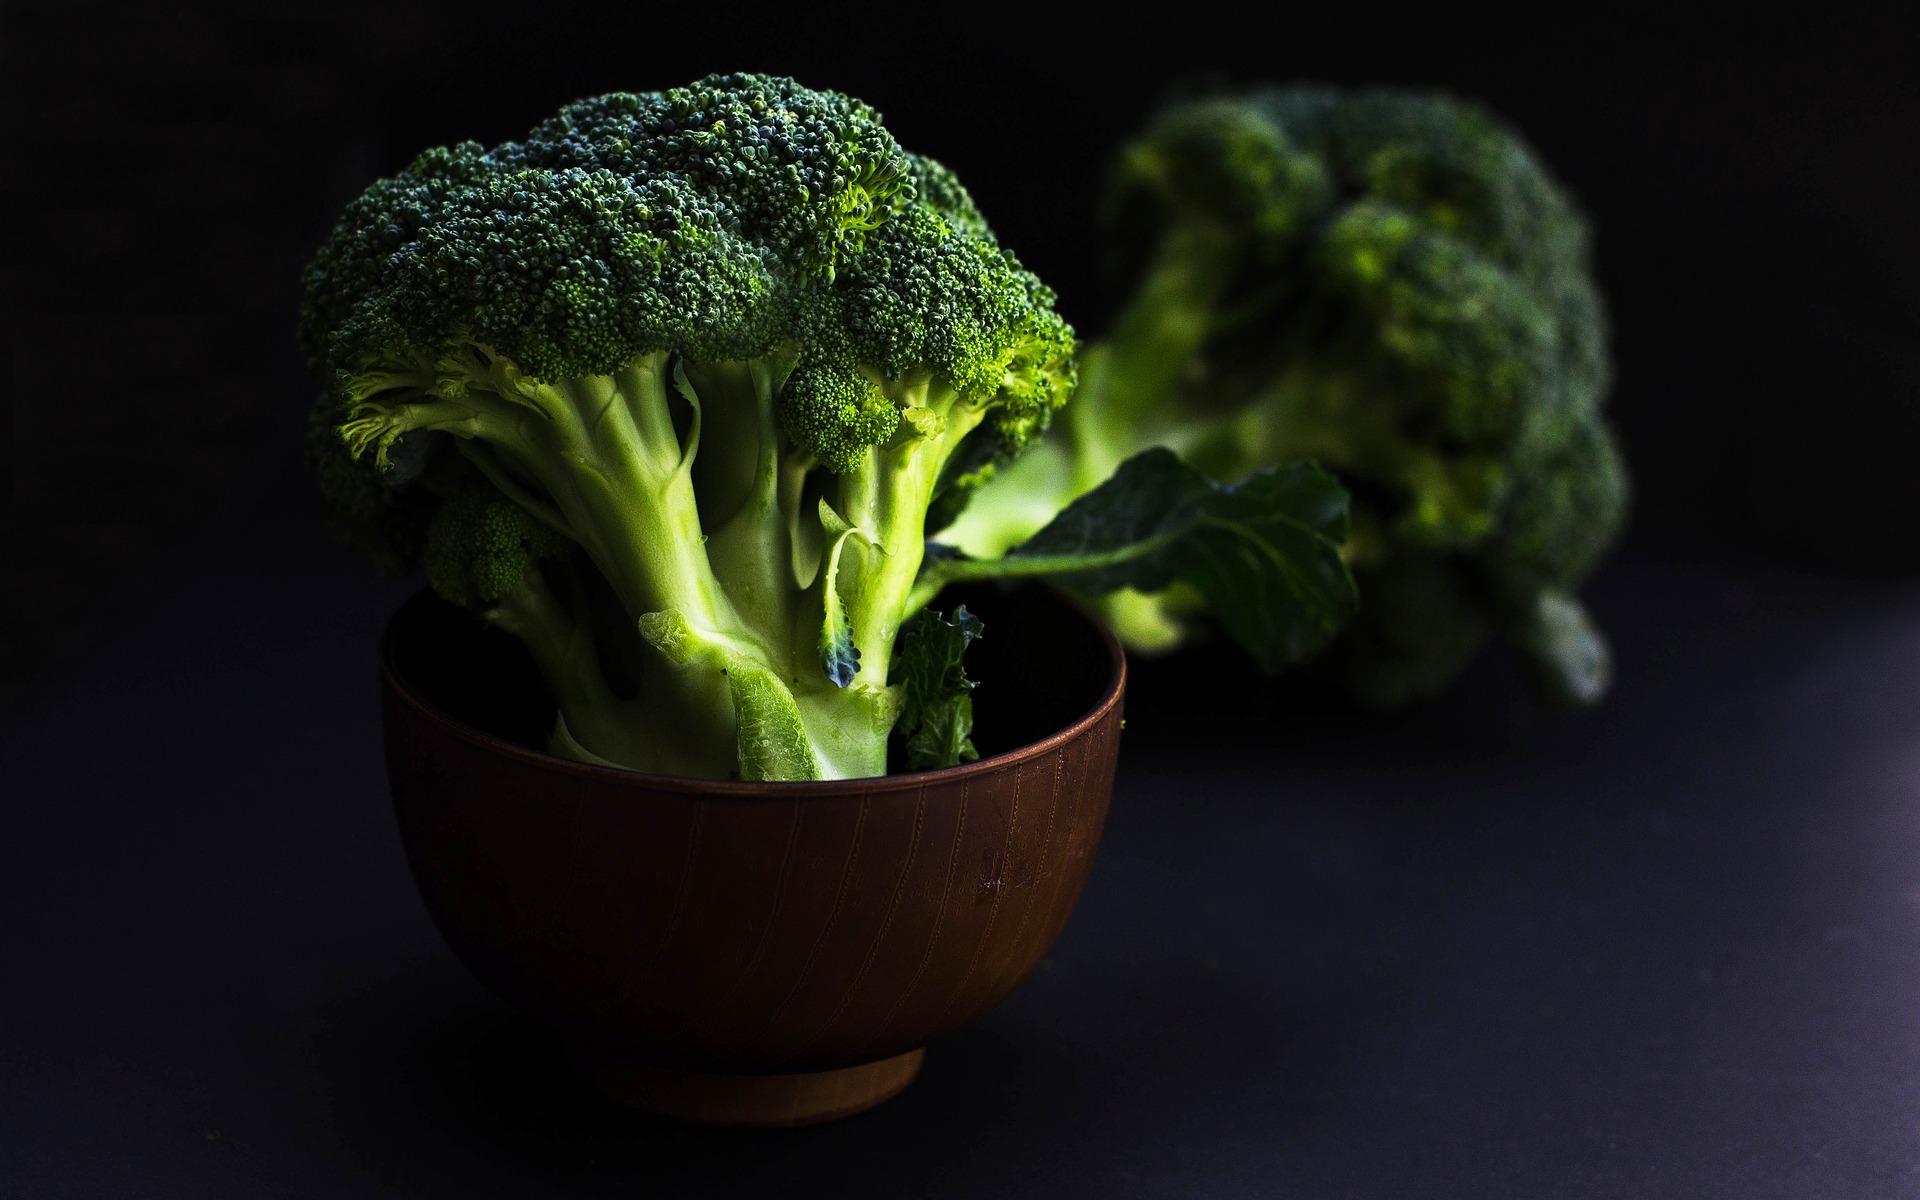 Compounds in broccoli can help prevent cancer